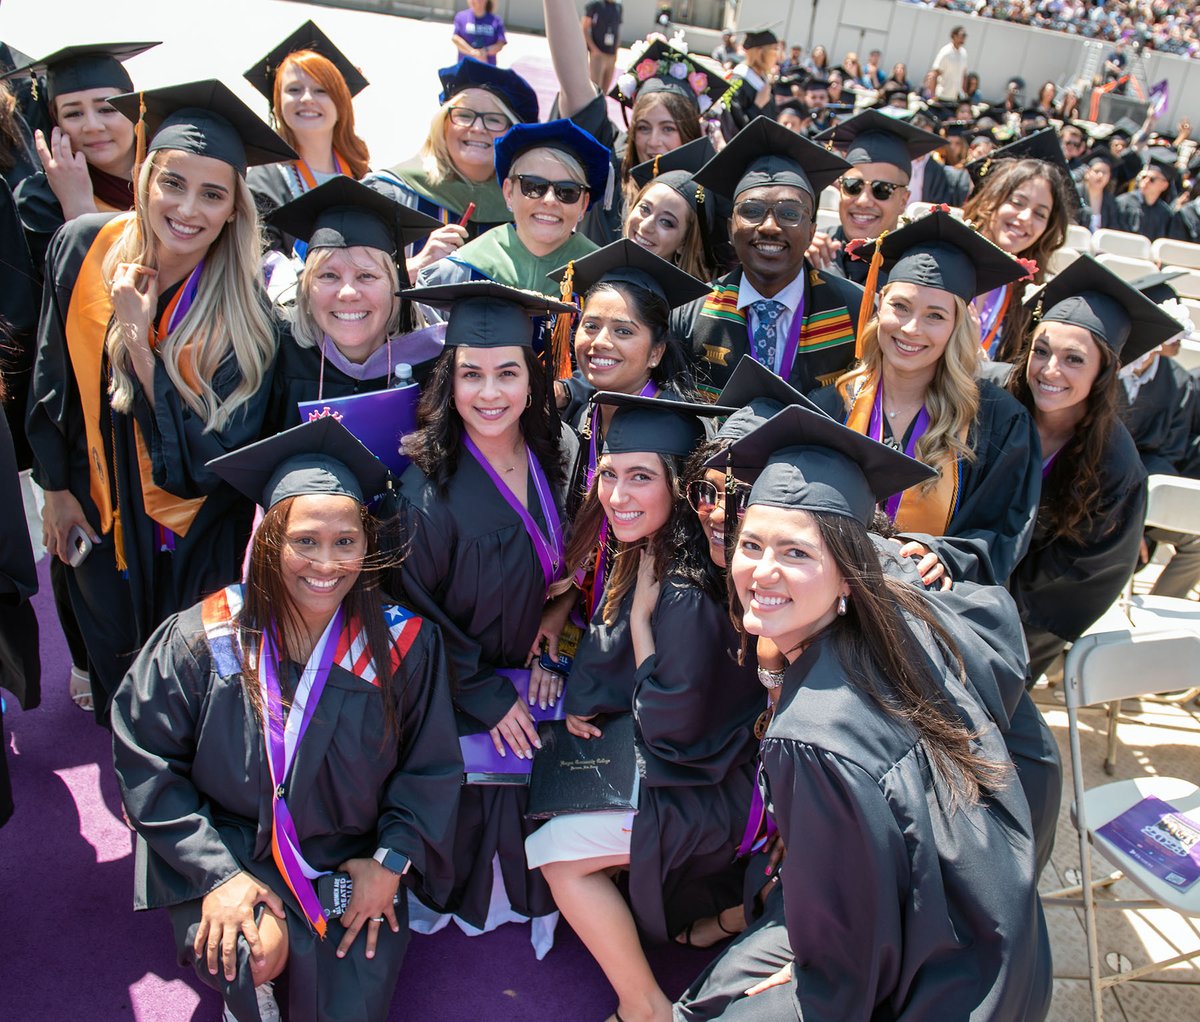 What an incredible day! Visit grad.bergen.edu for complete coverage, including videos, stories and photos from the biggest day of the academic year. Congratulations, class of 2023!